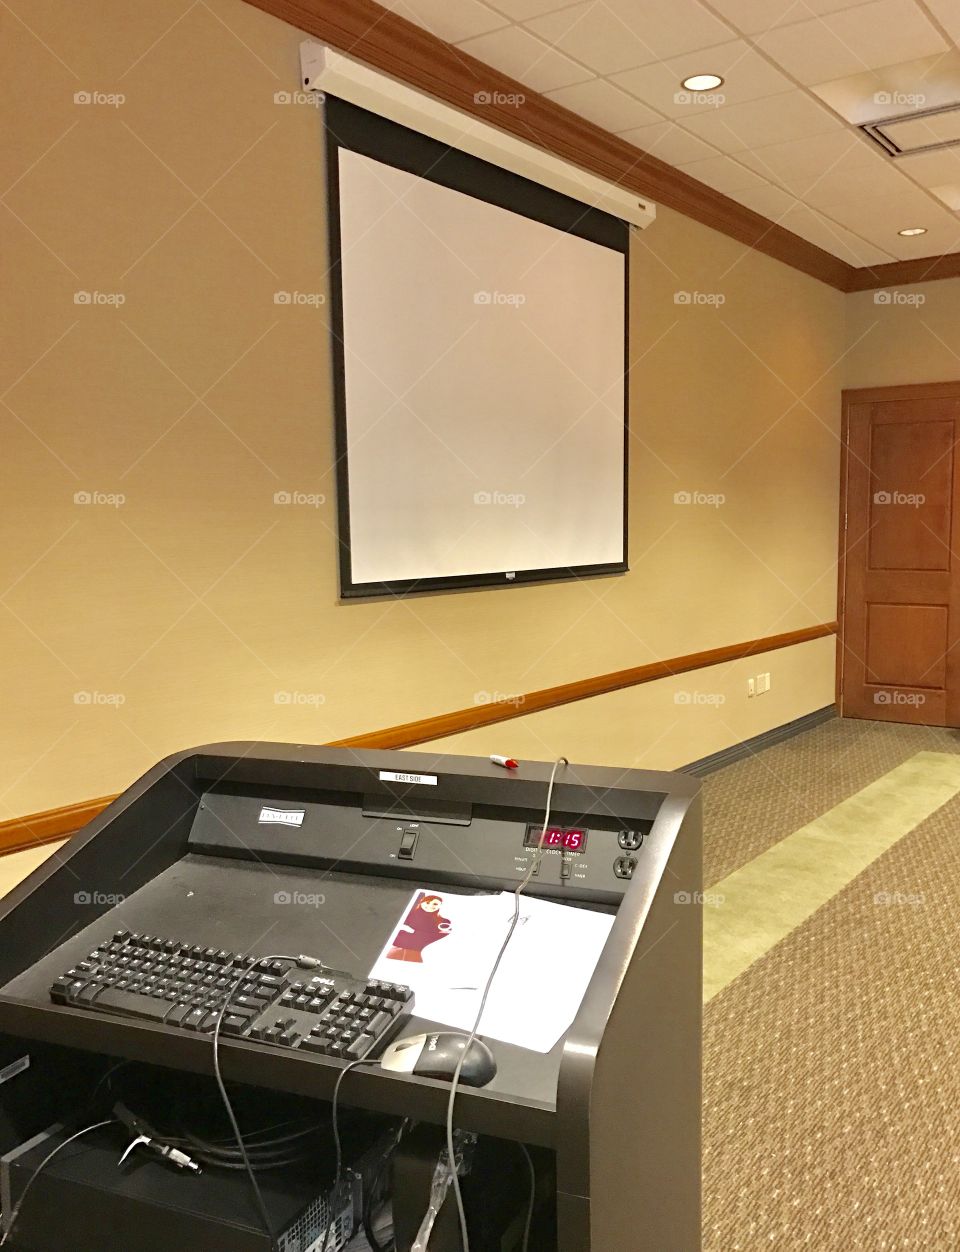 Corporate Learning - Class Setup - Projection Screen